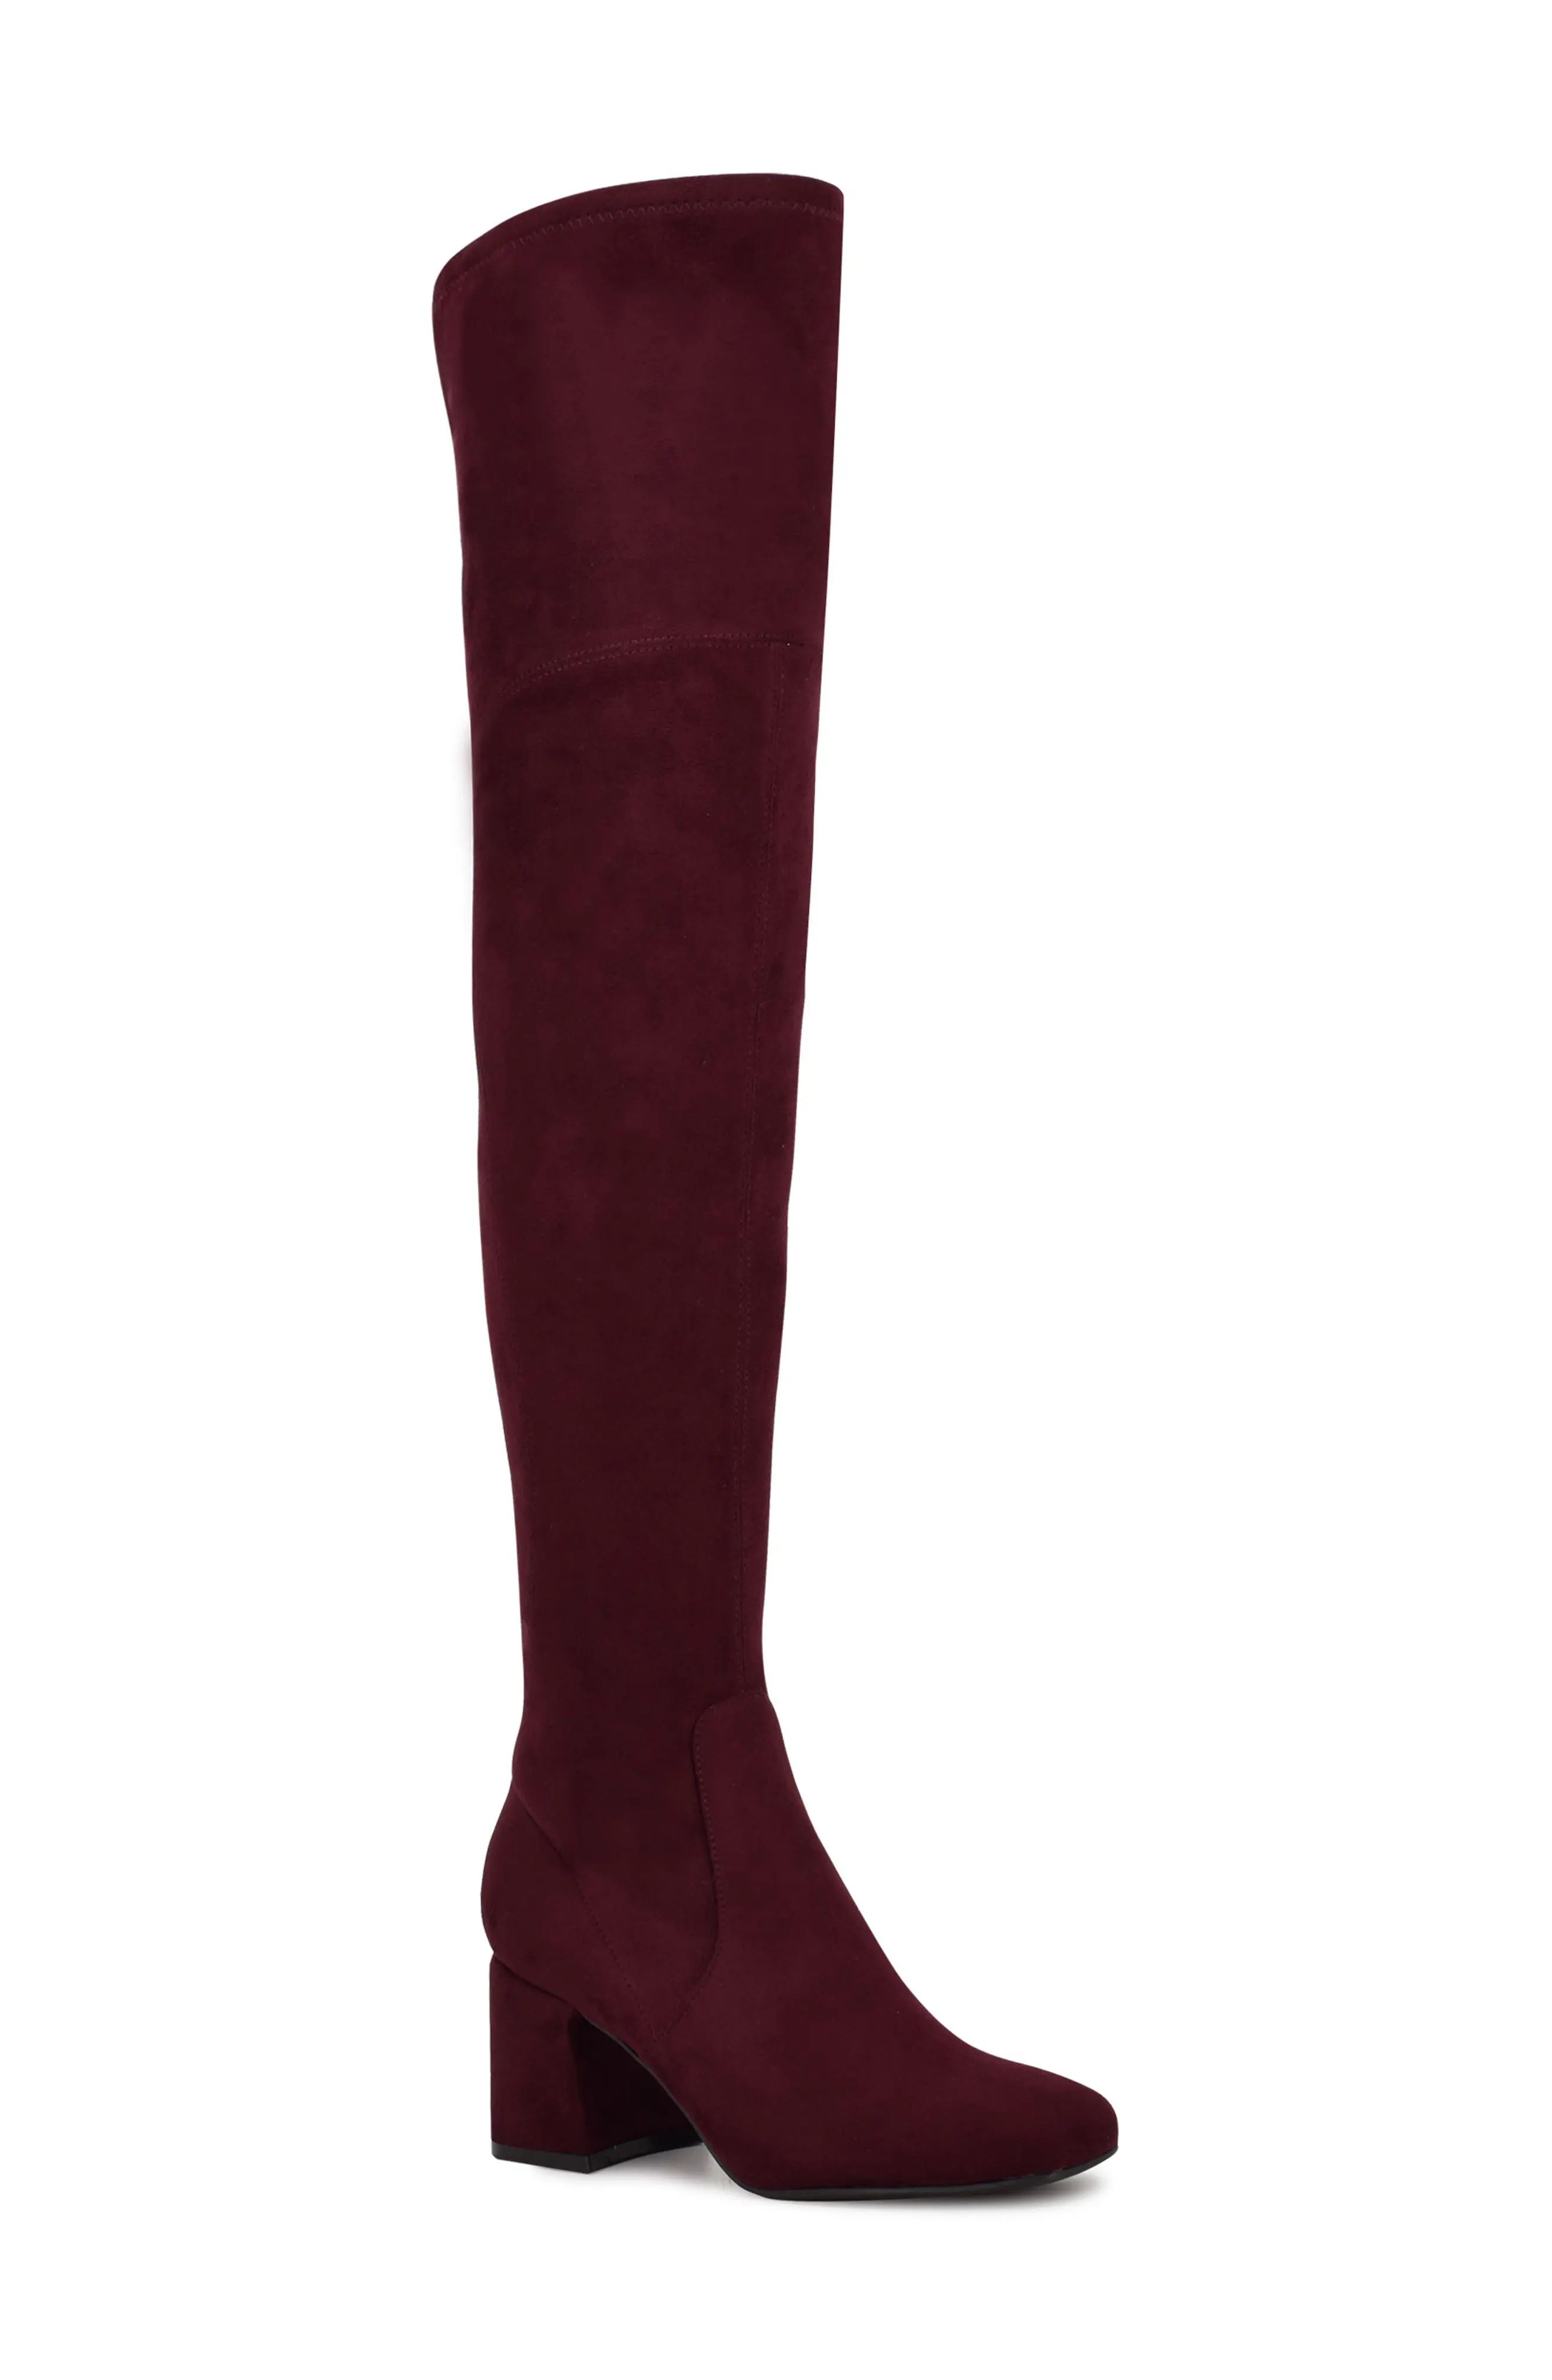 Nine West Blocky Over the Knee Boot, Size 6.5 in Burgundy at Nordstrom | Nordstrom